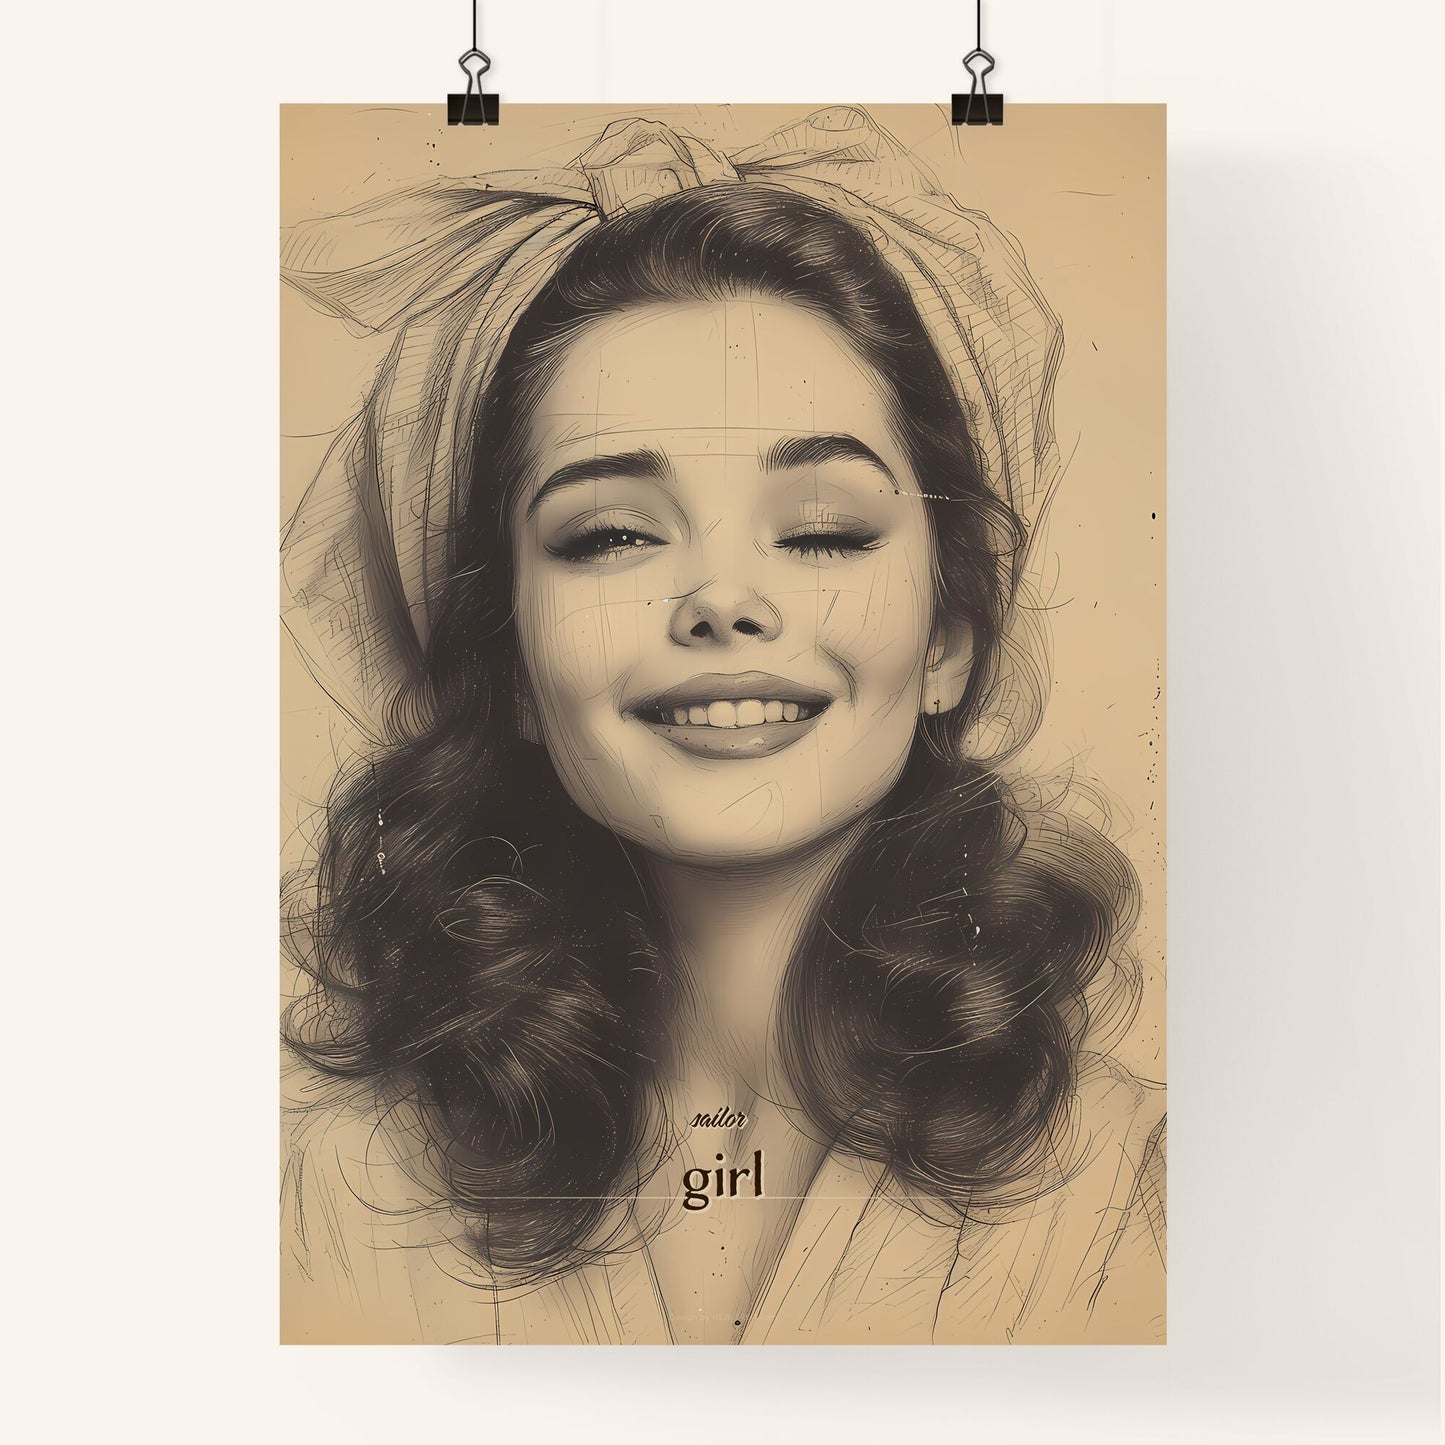 sailor, girl, A Poster of a woman with a bow on her head Default Title